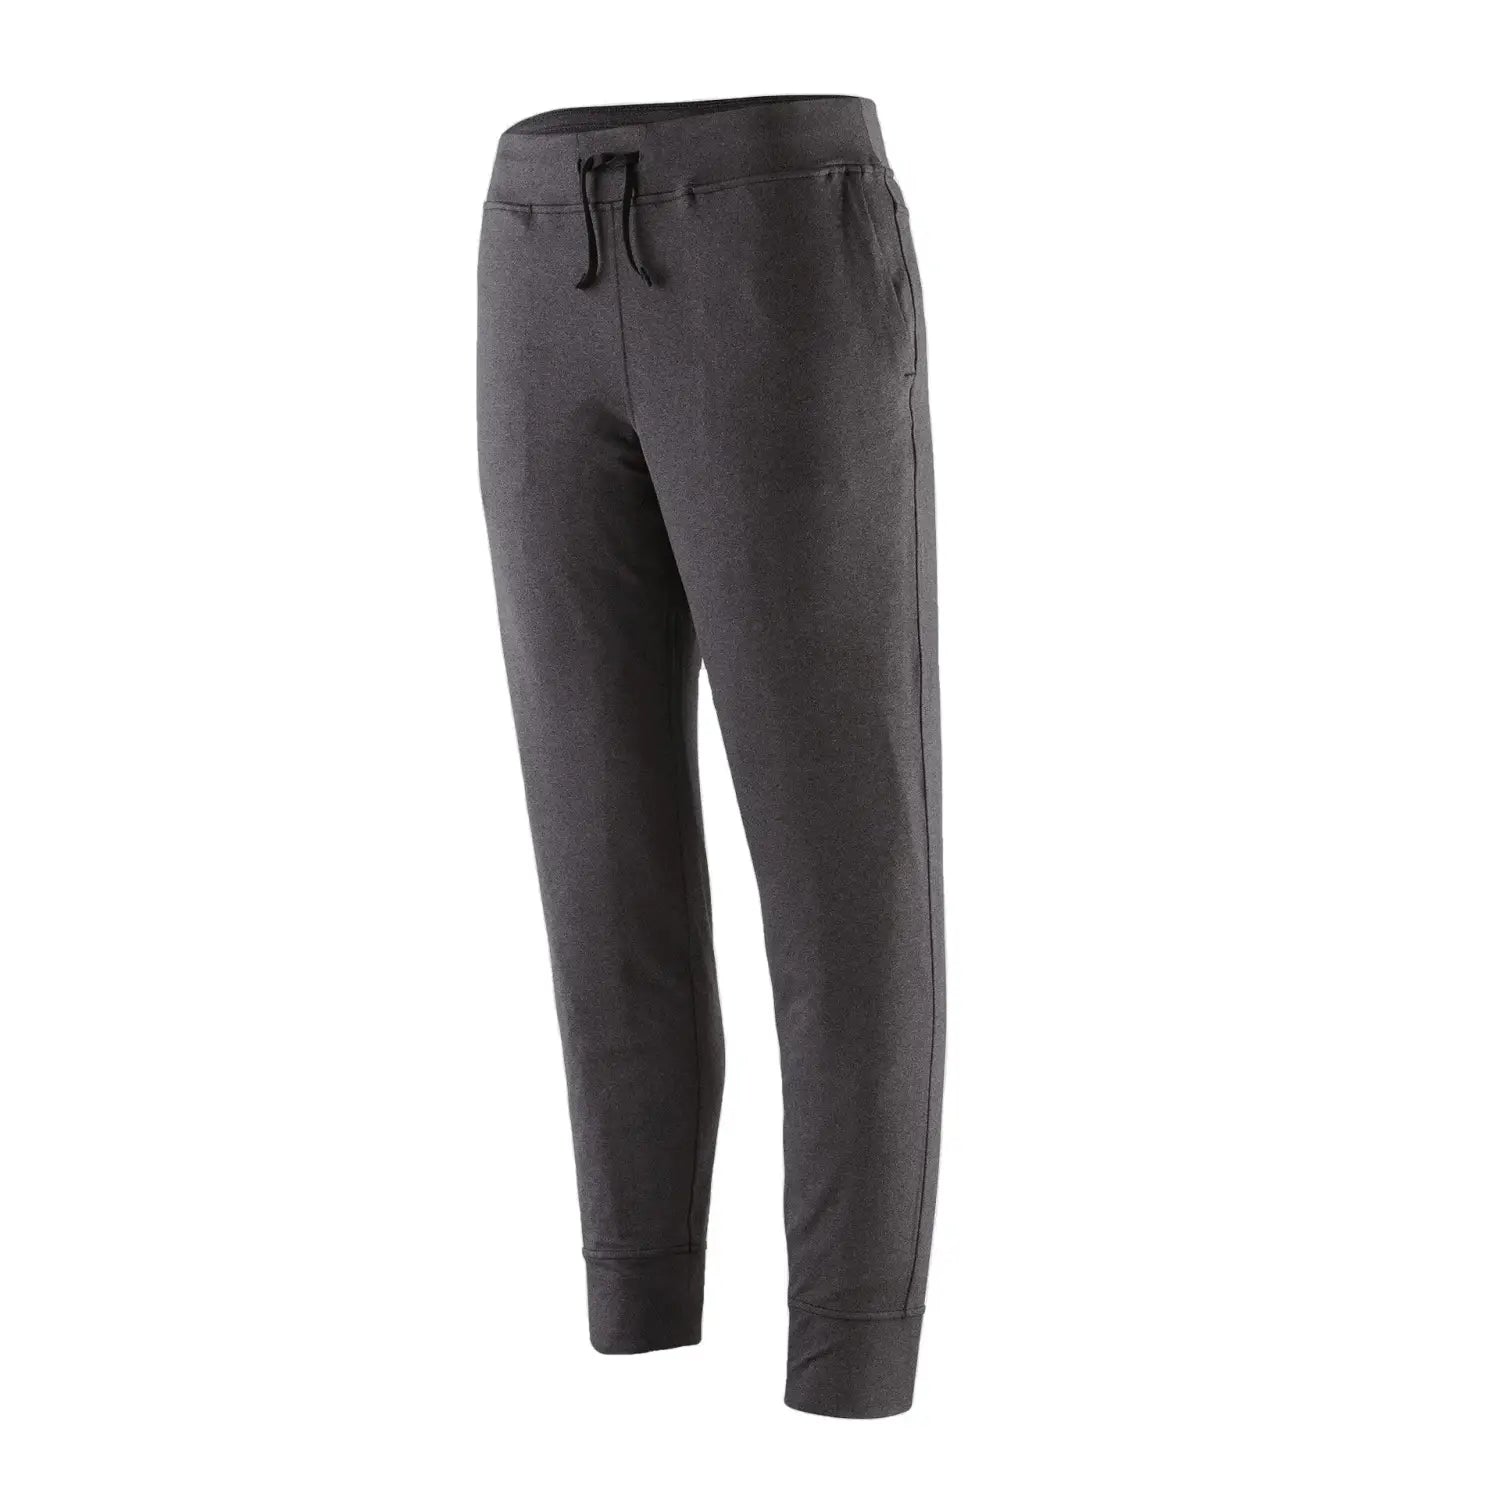 Patagonia W's Pack Out Joggers, Black X-Dye, front view 